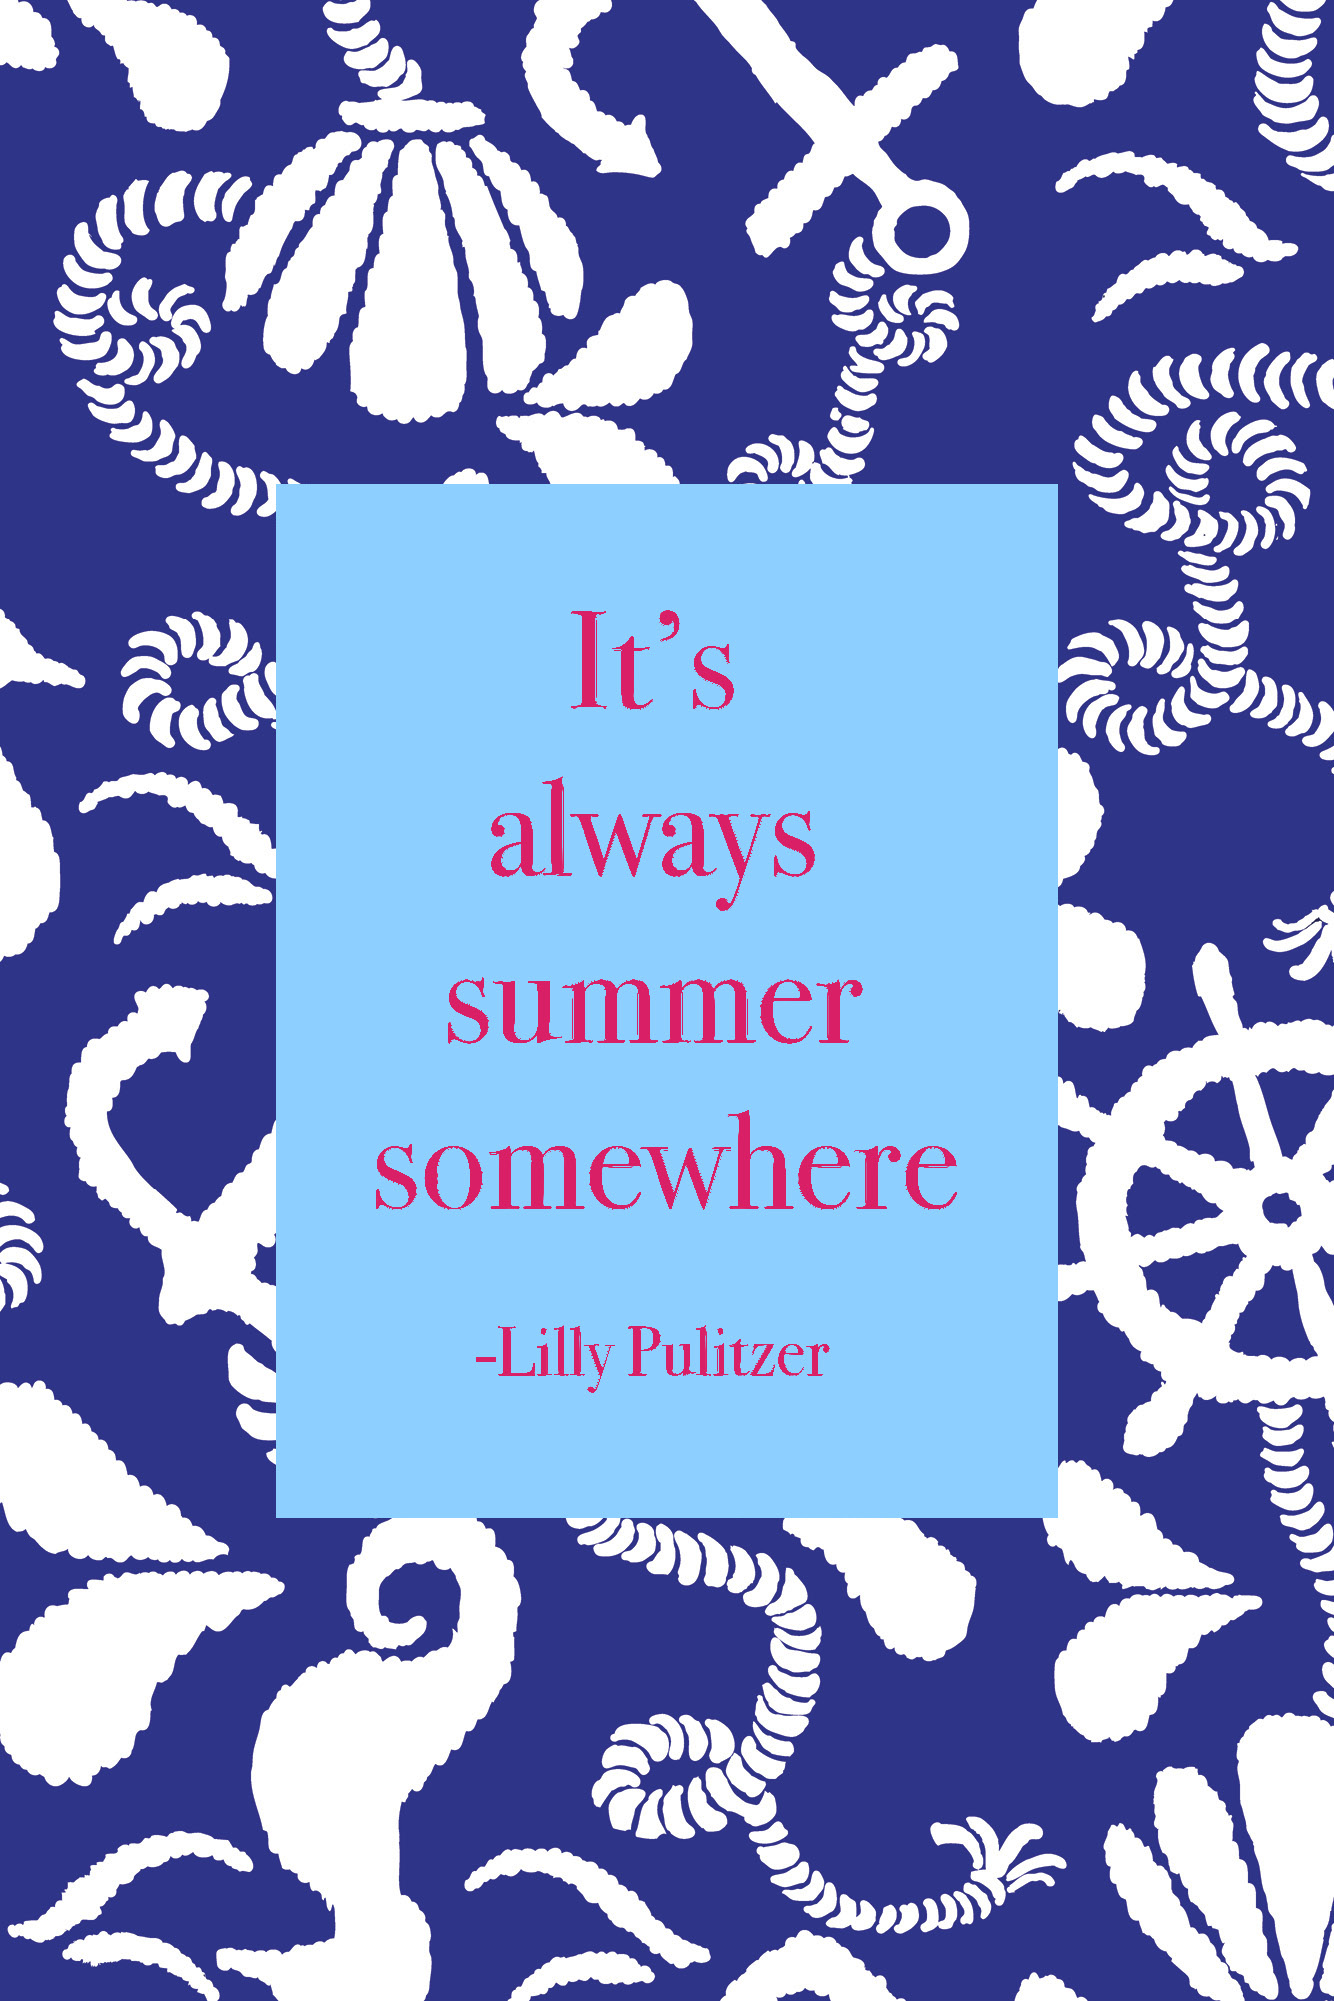 Lilly Pulitzer Quotes - Alpha Sigma Tau Phone Background - HD Wallpaper 